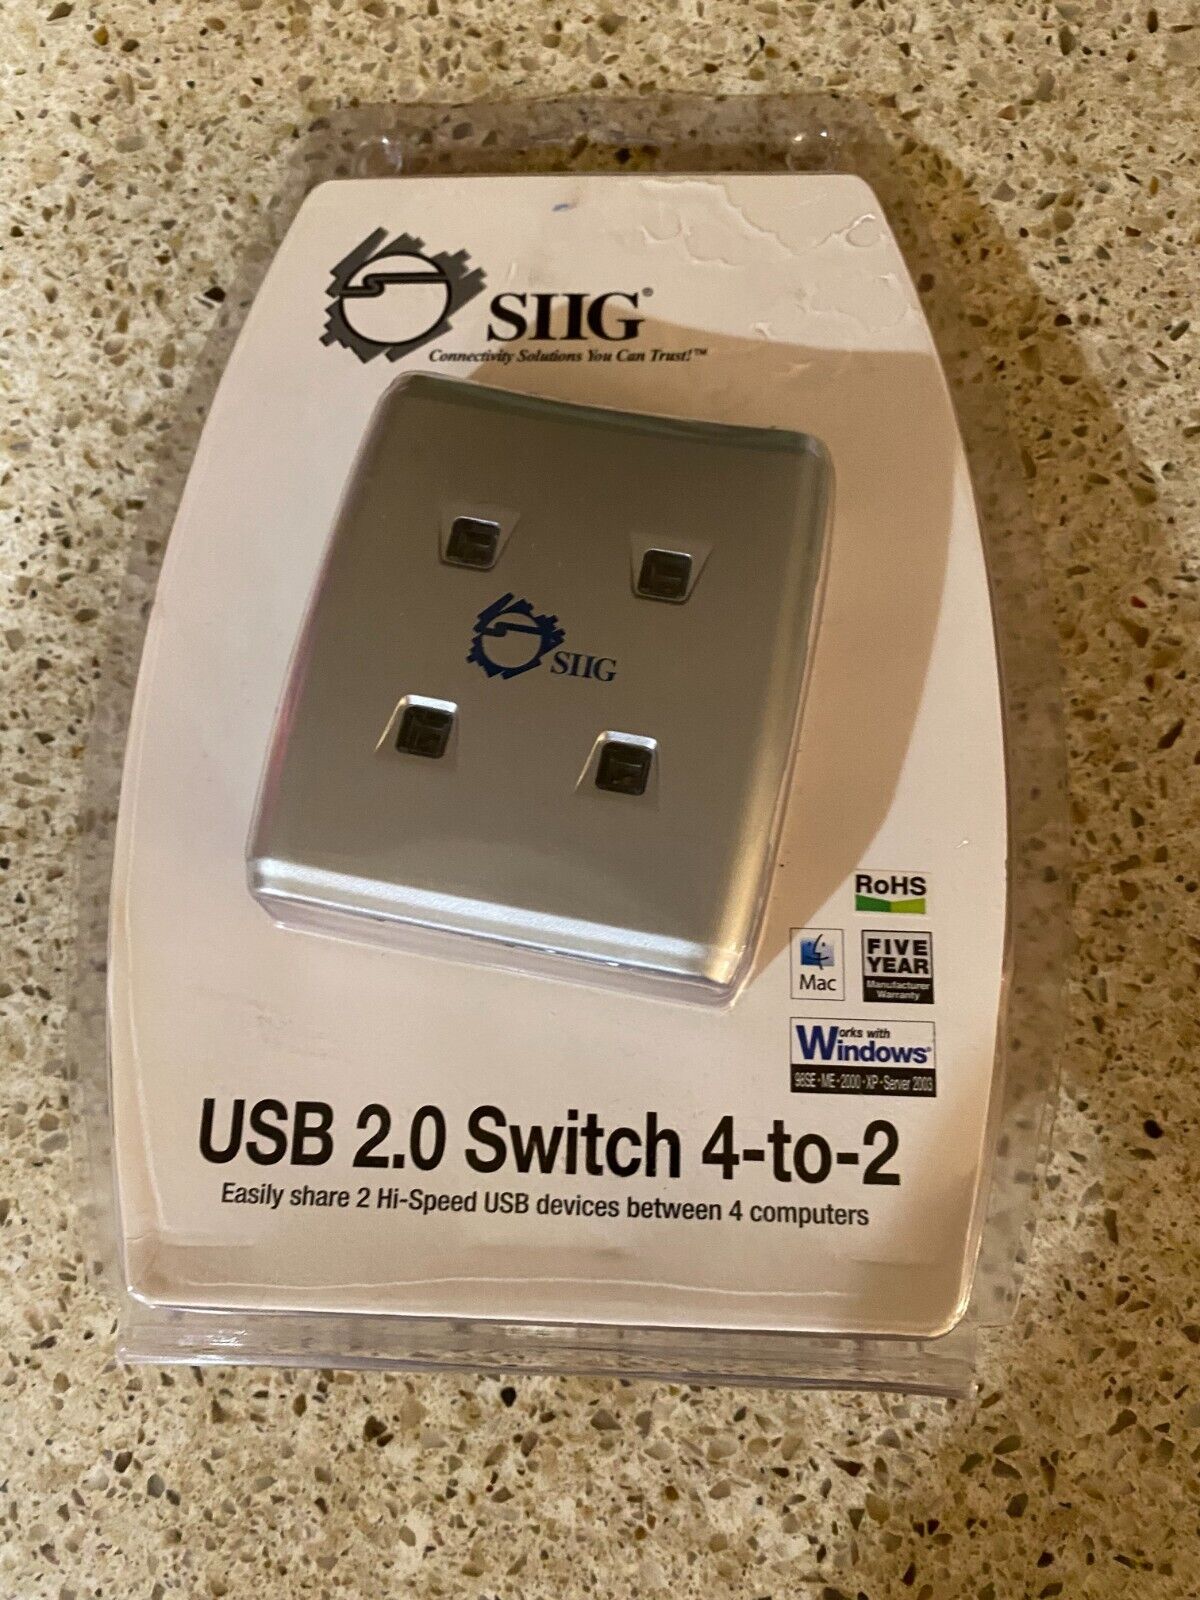 Siig USB 2.0 Switch 4-to-2 Share 2 HiSpeed USB Devices 4 Computers #JU-SW4212-S1